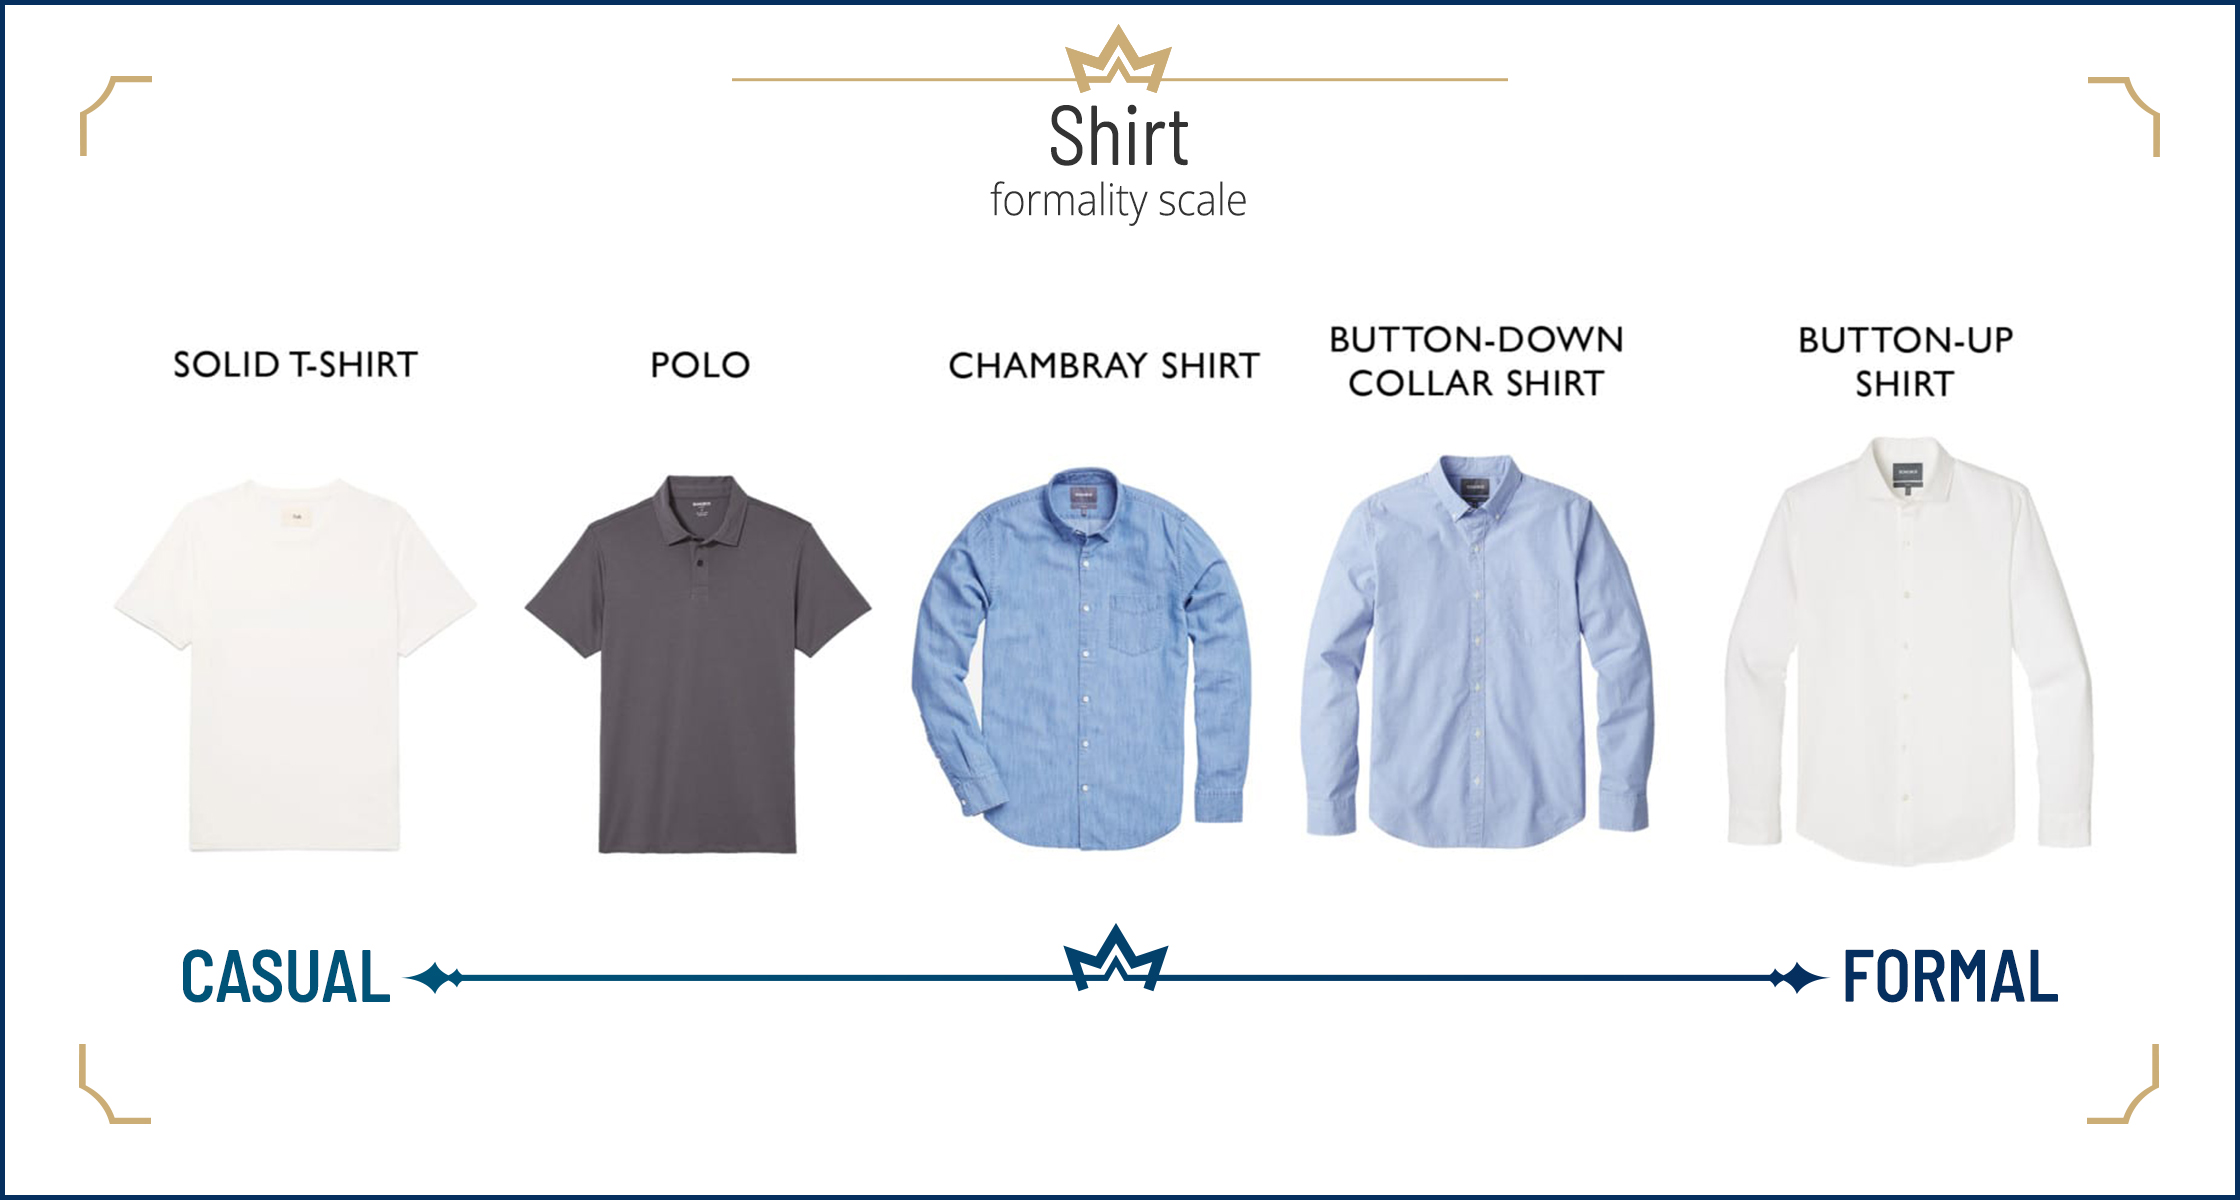 Different business casual shirt styles for men and their formality scale